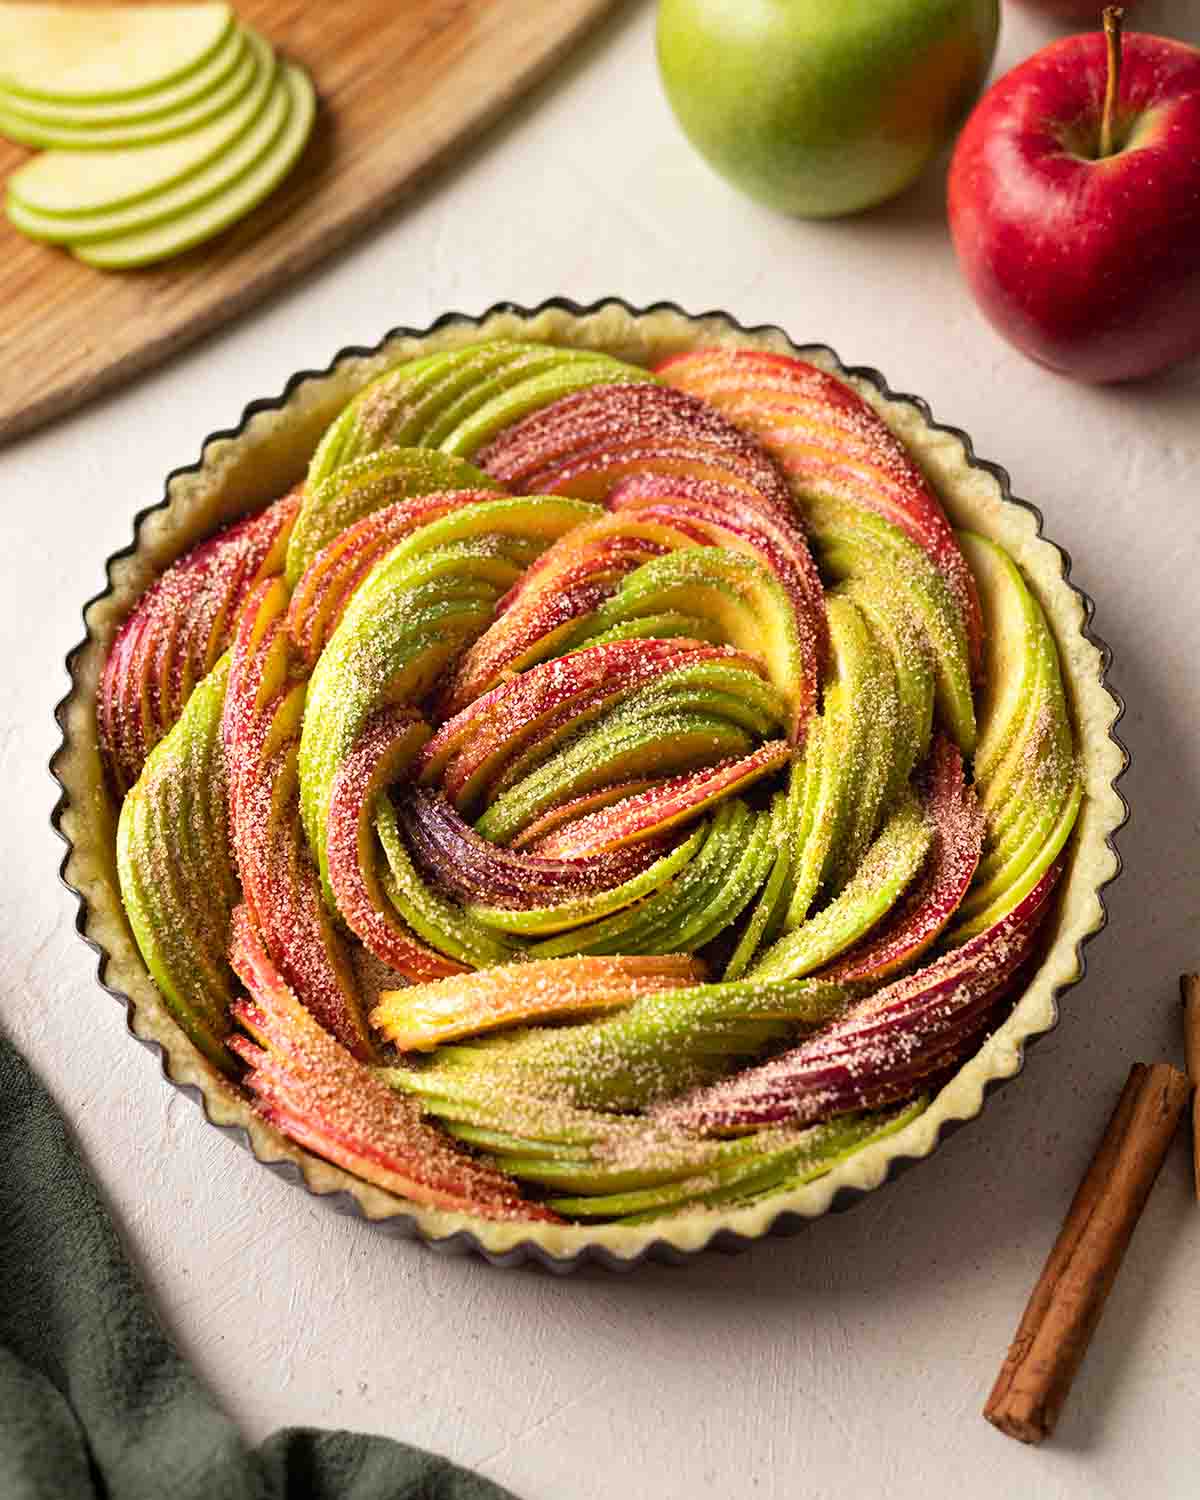 Unbaked vegan apple tart filled with thinly sliced red and green apples.